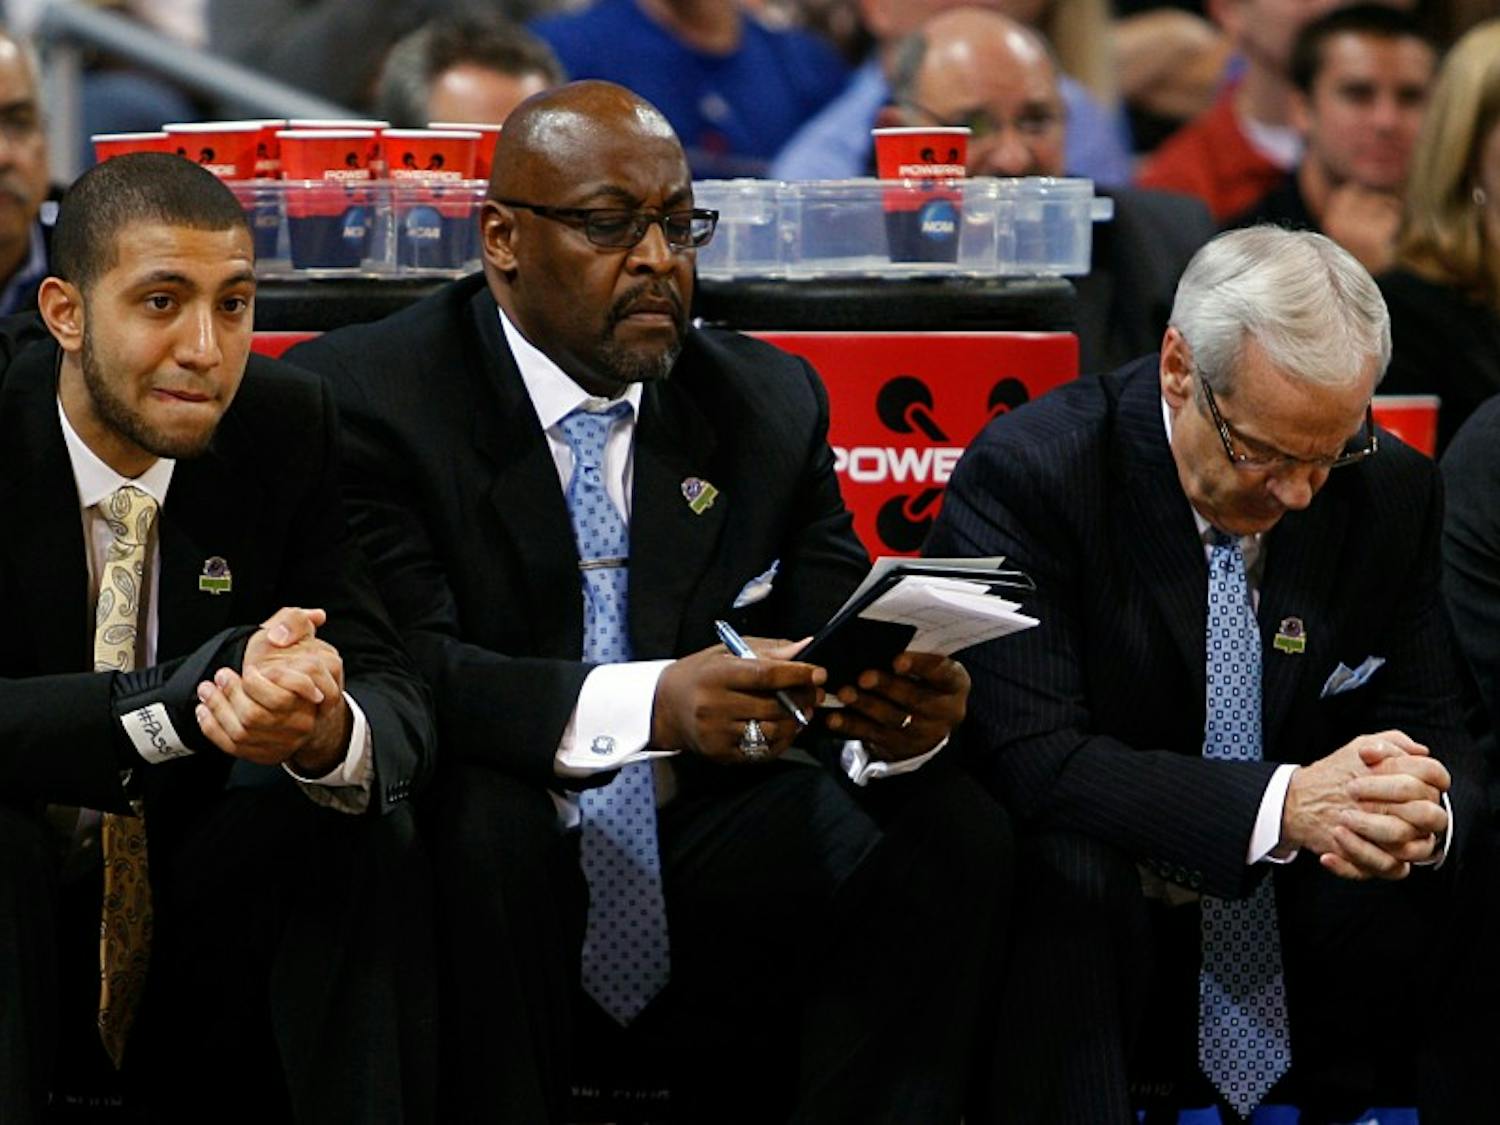 UNC guard Kendall Marshall, assistant coach Steve Robinson and head coach Roy Williams watch nervously from the bench as time winds down. The Tar Heels defeated Ohio 73-65 in overtime at the Edward Jones Dome in St. Louis on Friday in the Sweet 16 round of the NCAA Tournament.